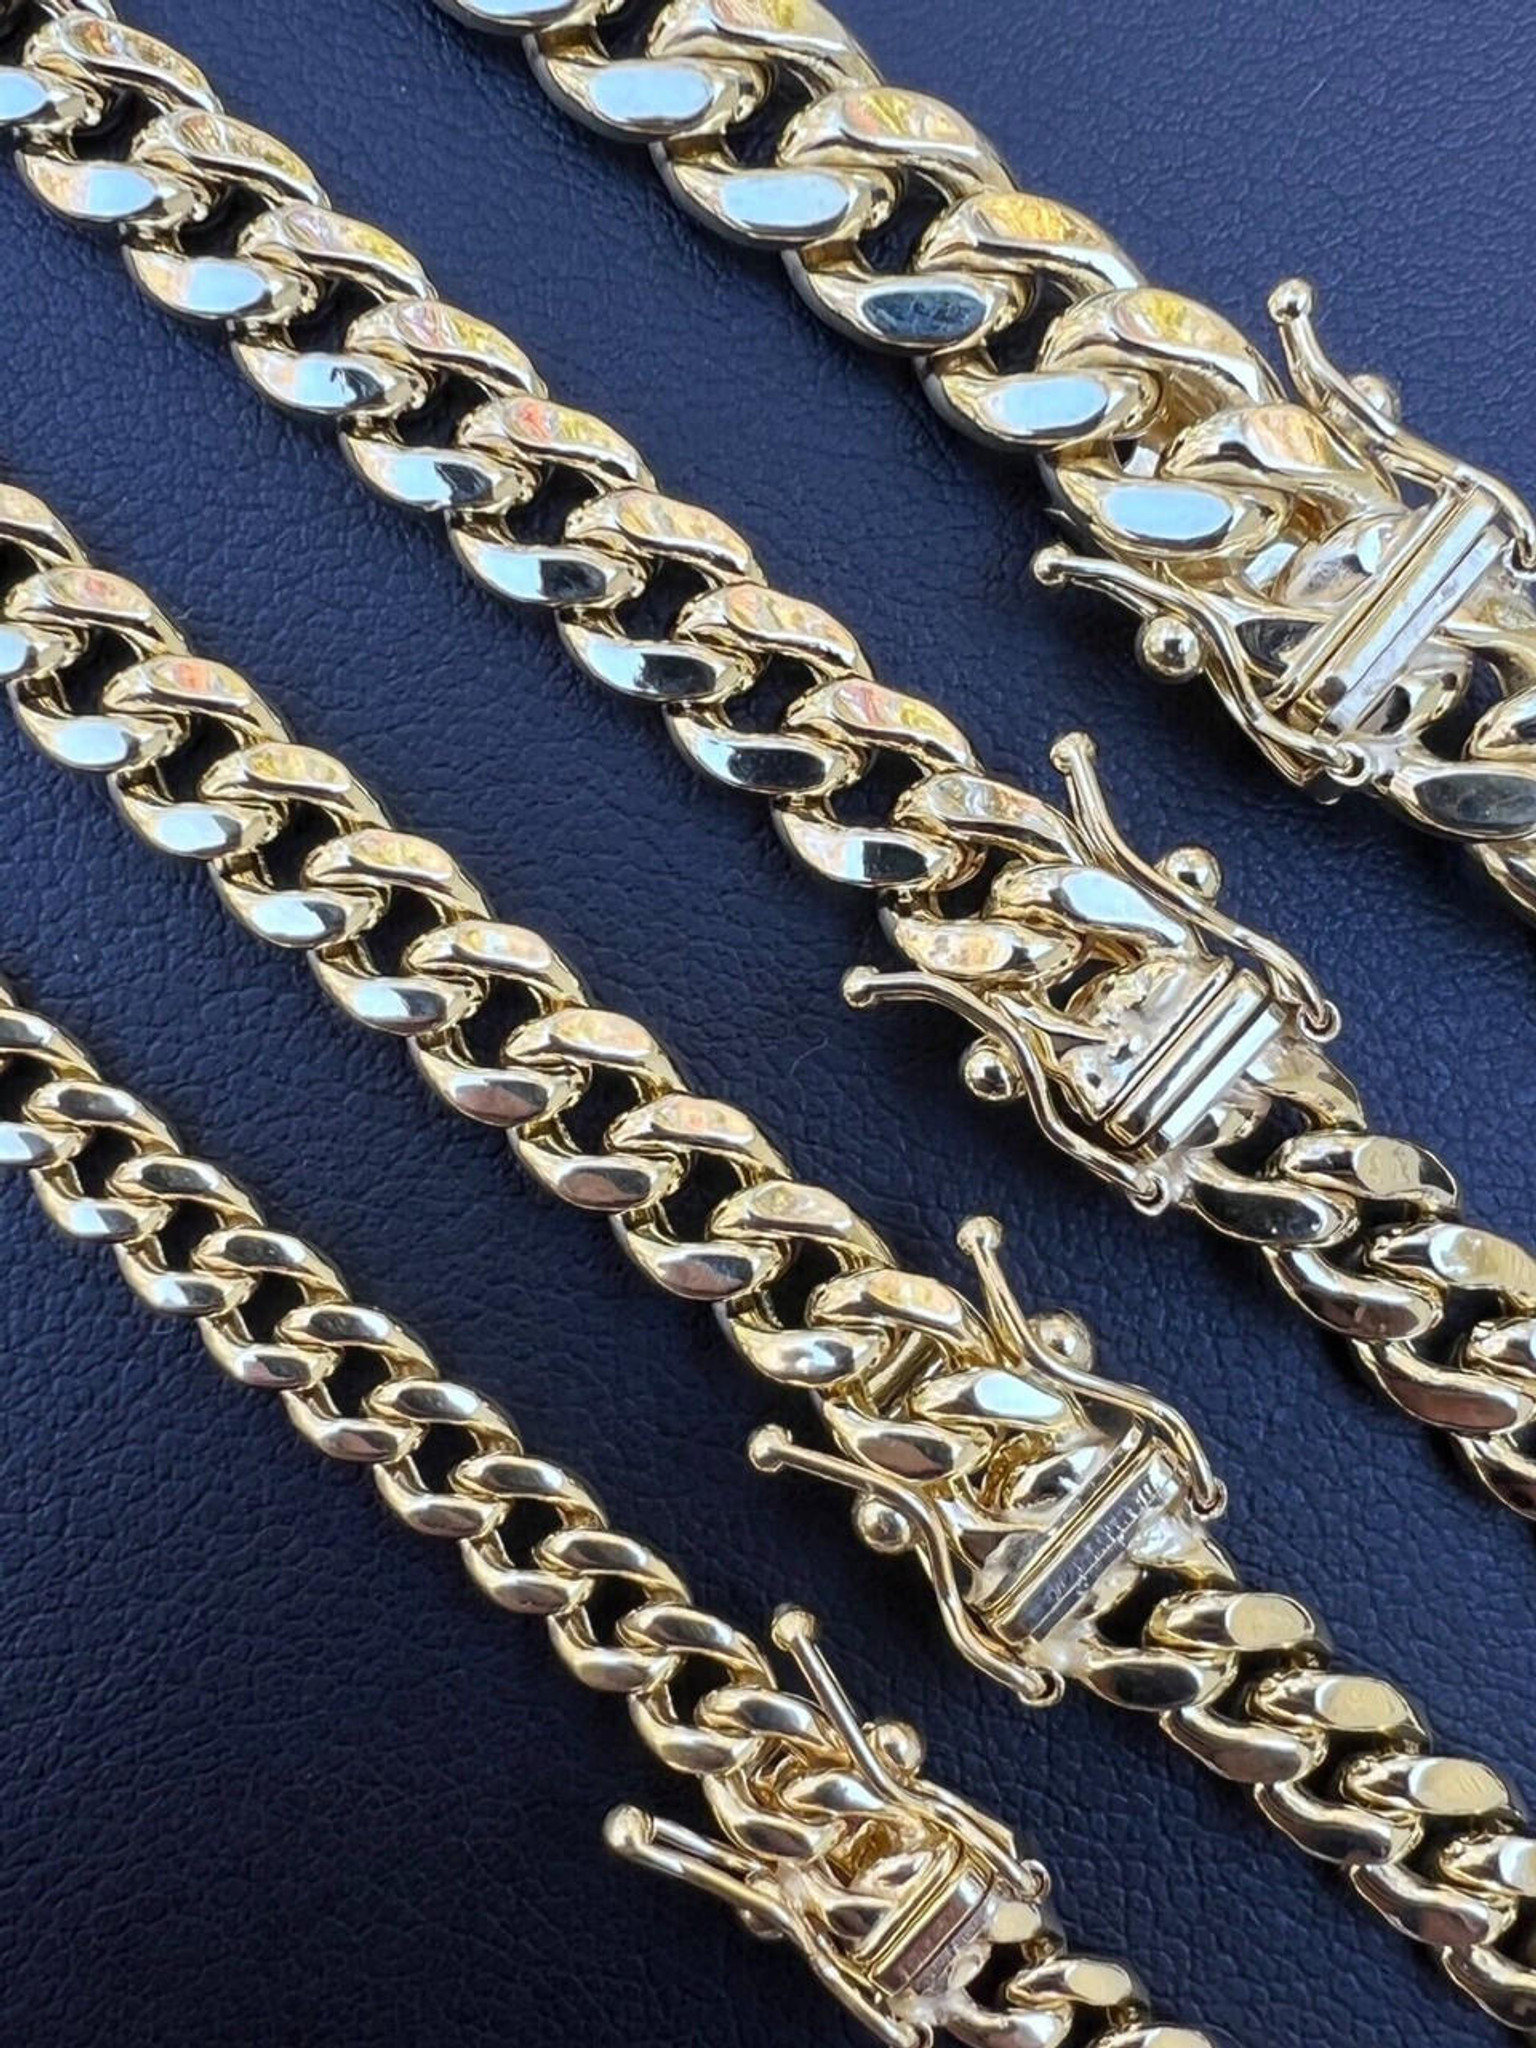 14k Yellow Gold Solid Miami Cuban link chain 18mm wide 488 Grams 26 Long